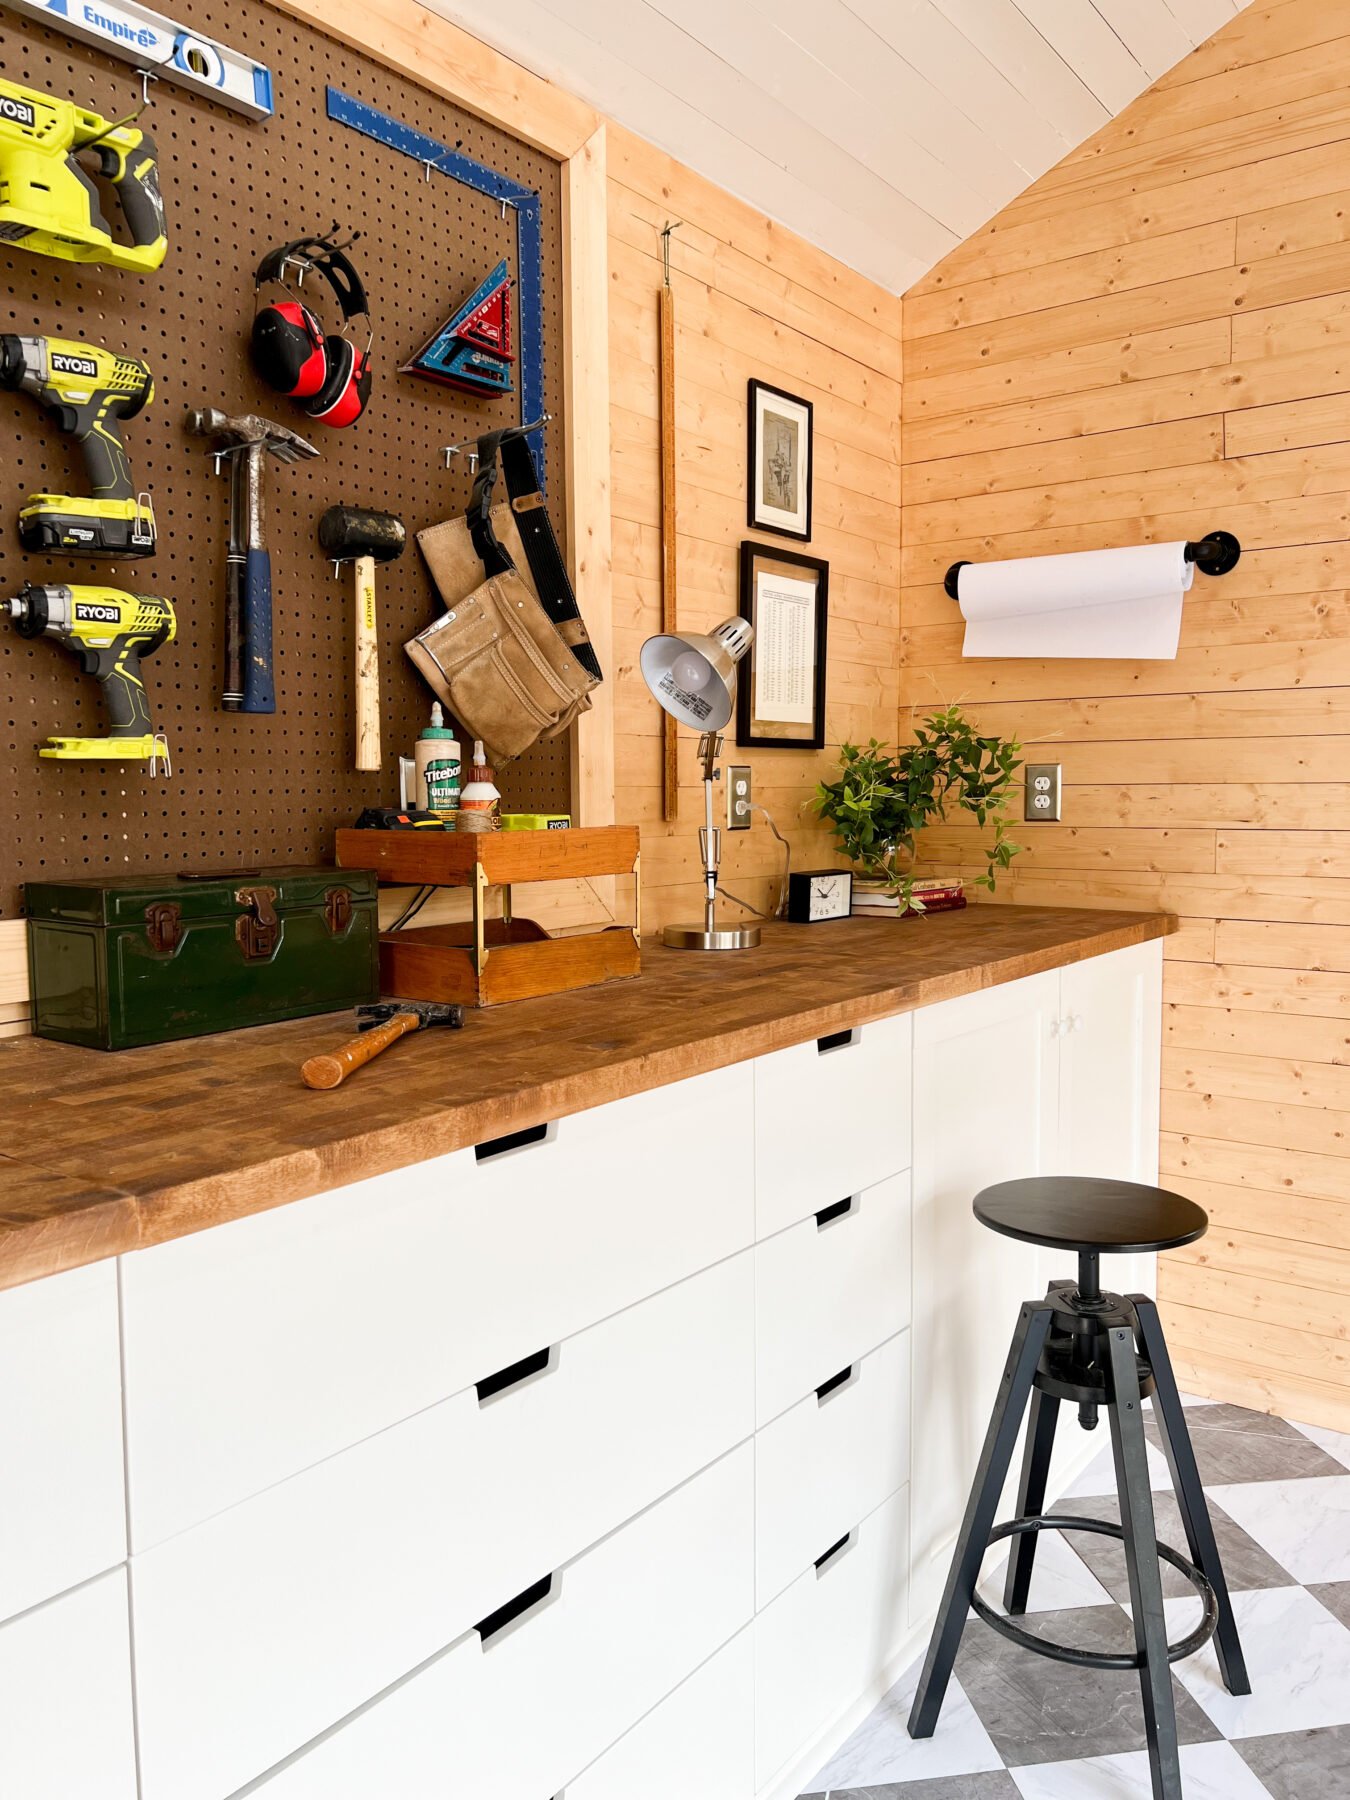 A closer look at the butcher block workbench inside the Premier PRO Tall Ranch.